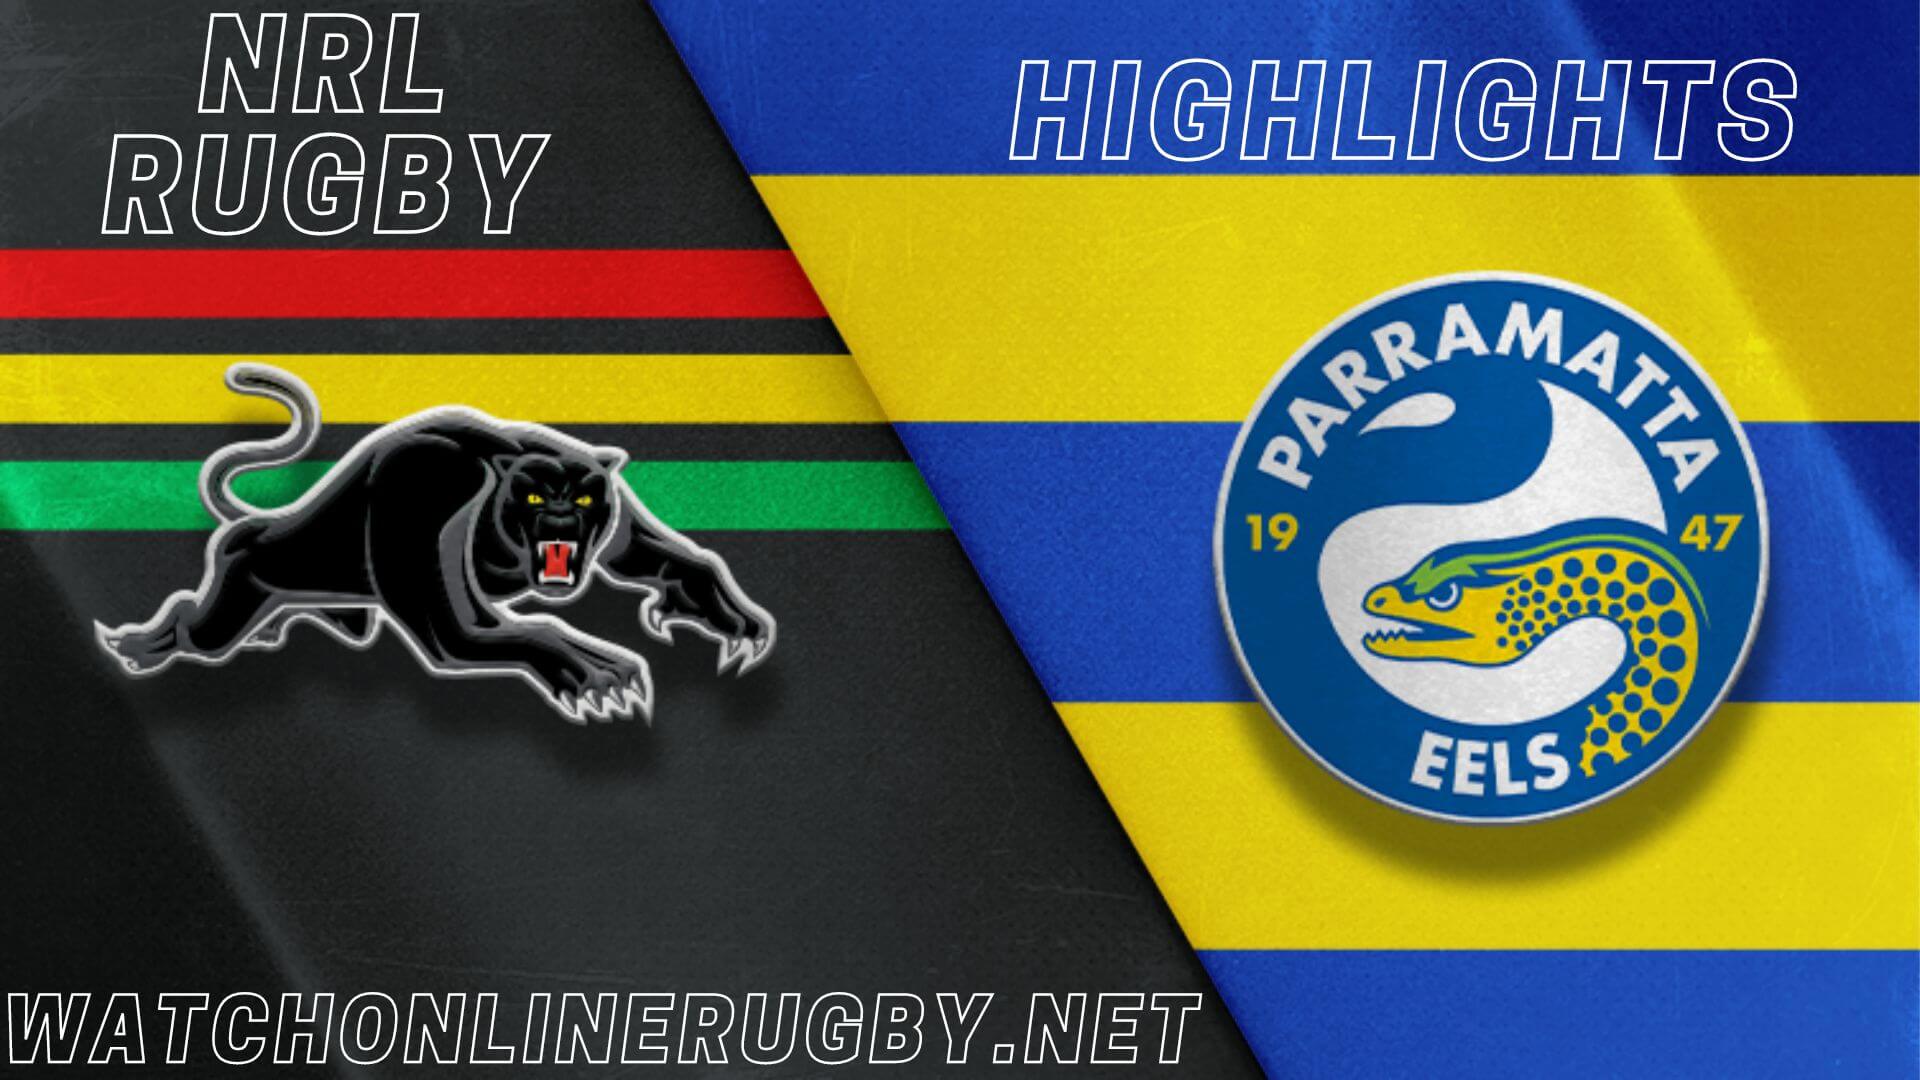 Eels Vs Panthers Highlights RD 20 NRL Rugby